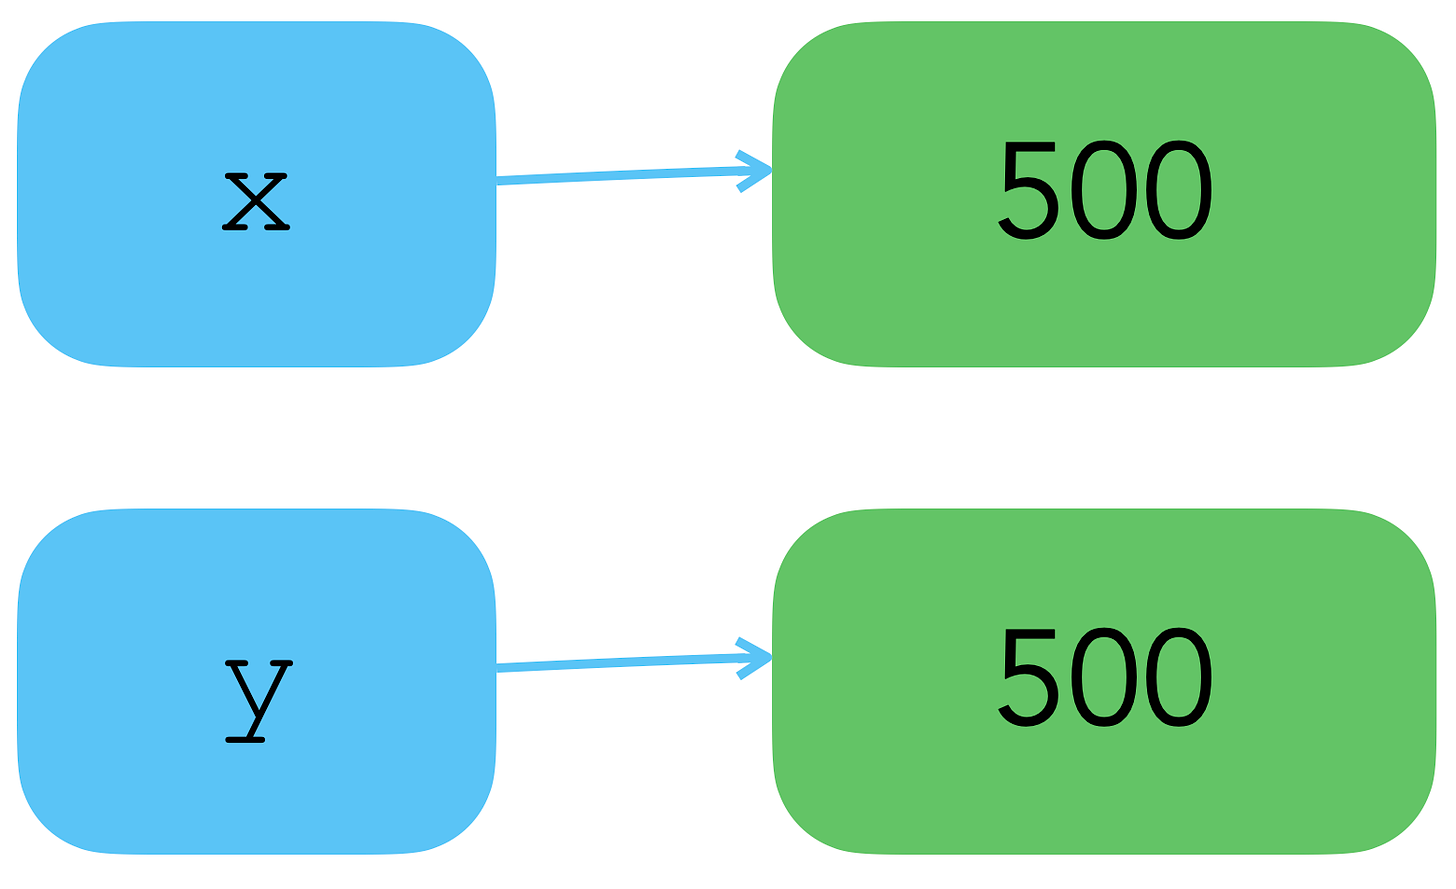 Diagram showing x and y each pointing to separate instances of the value 500.